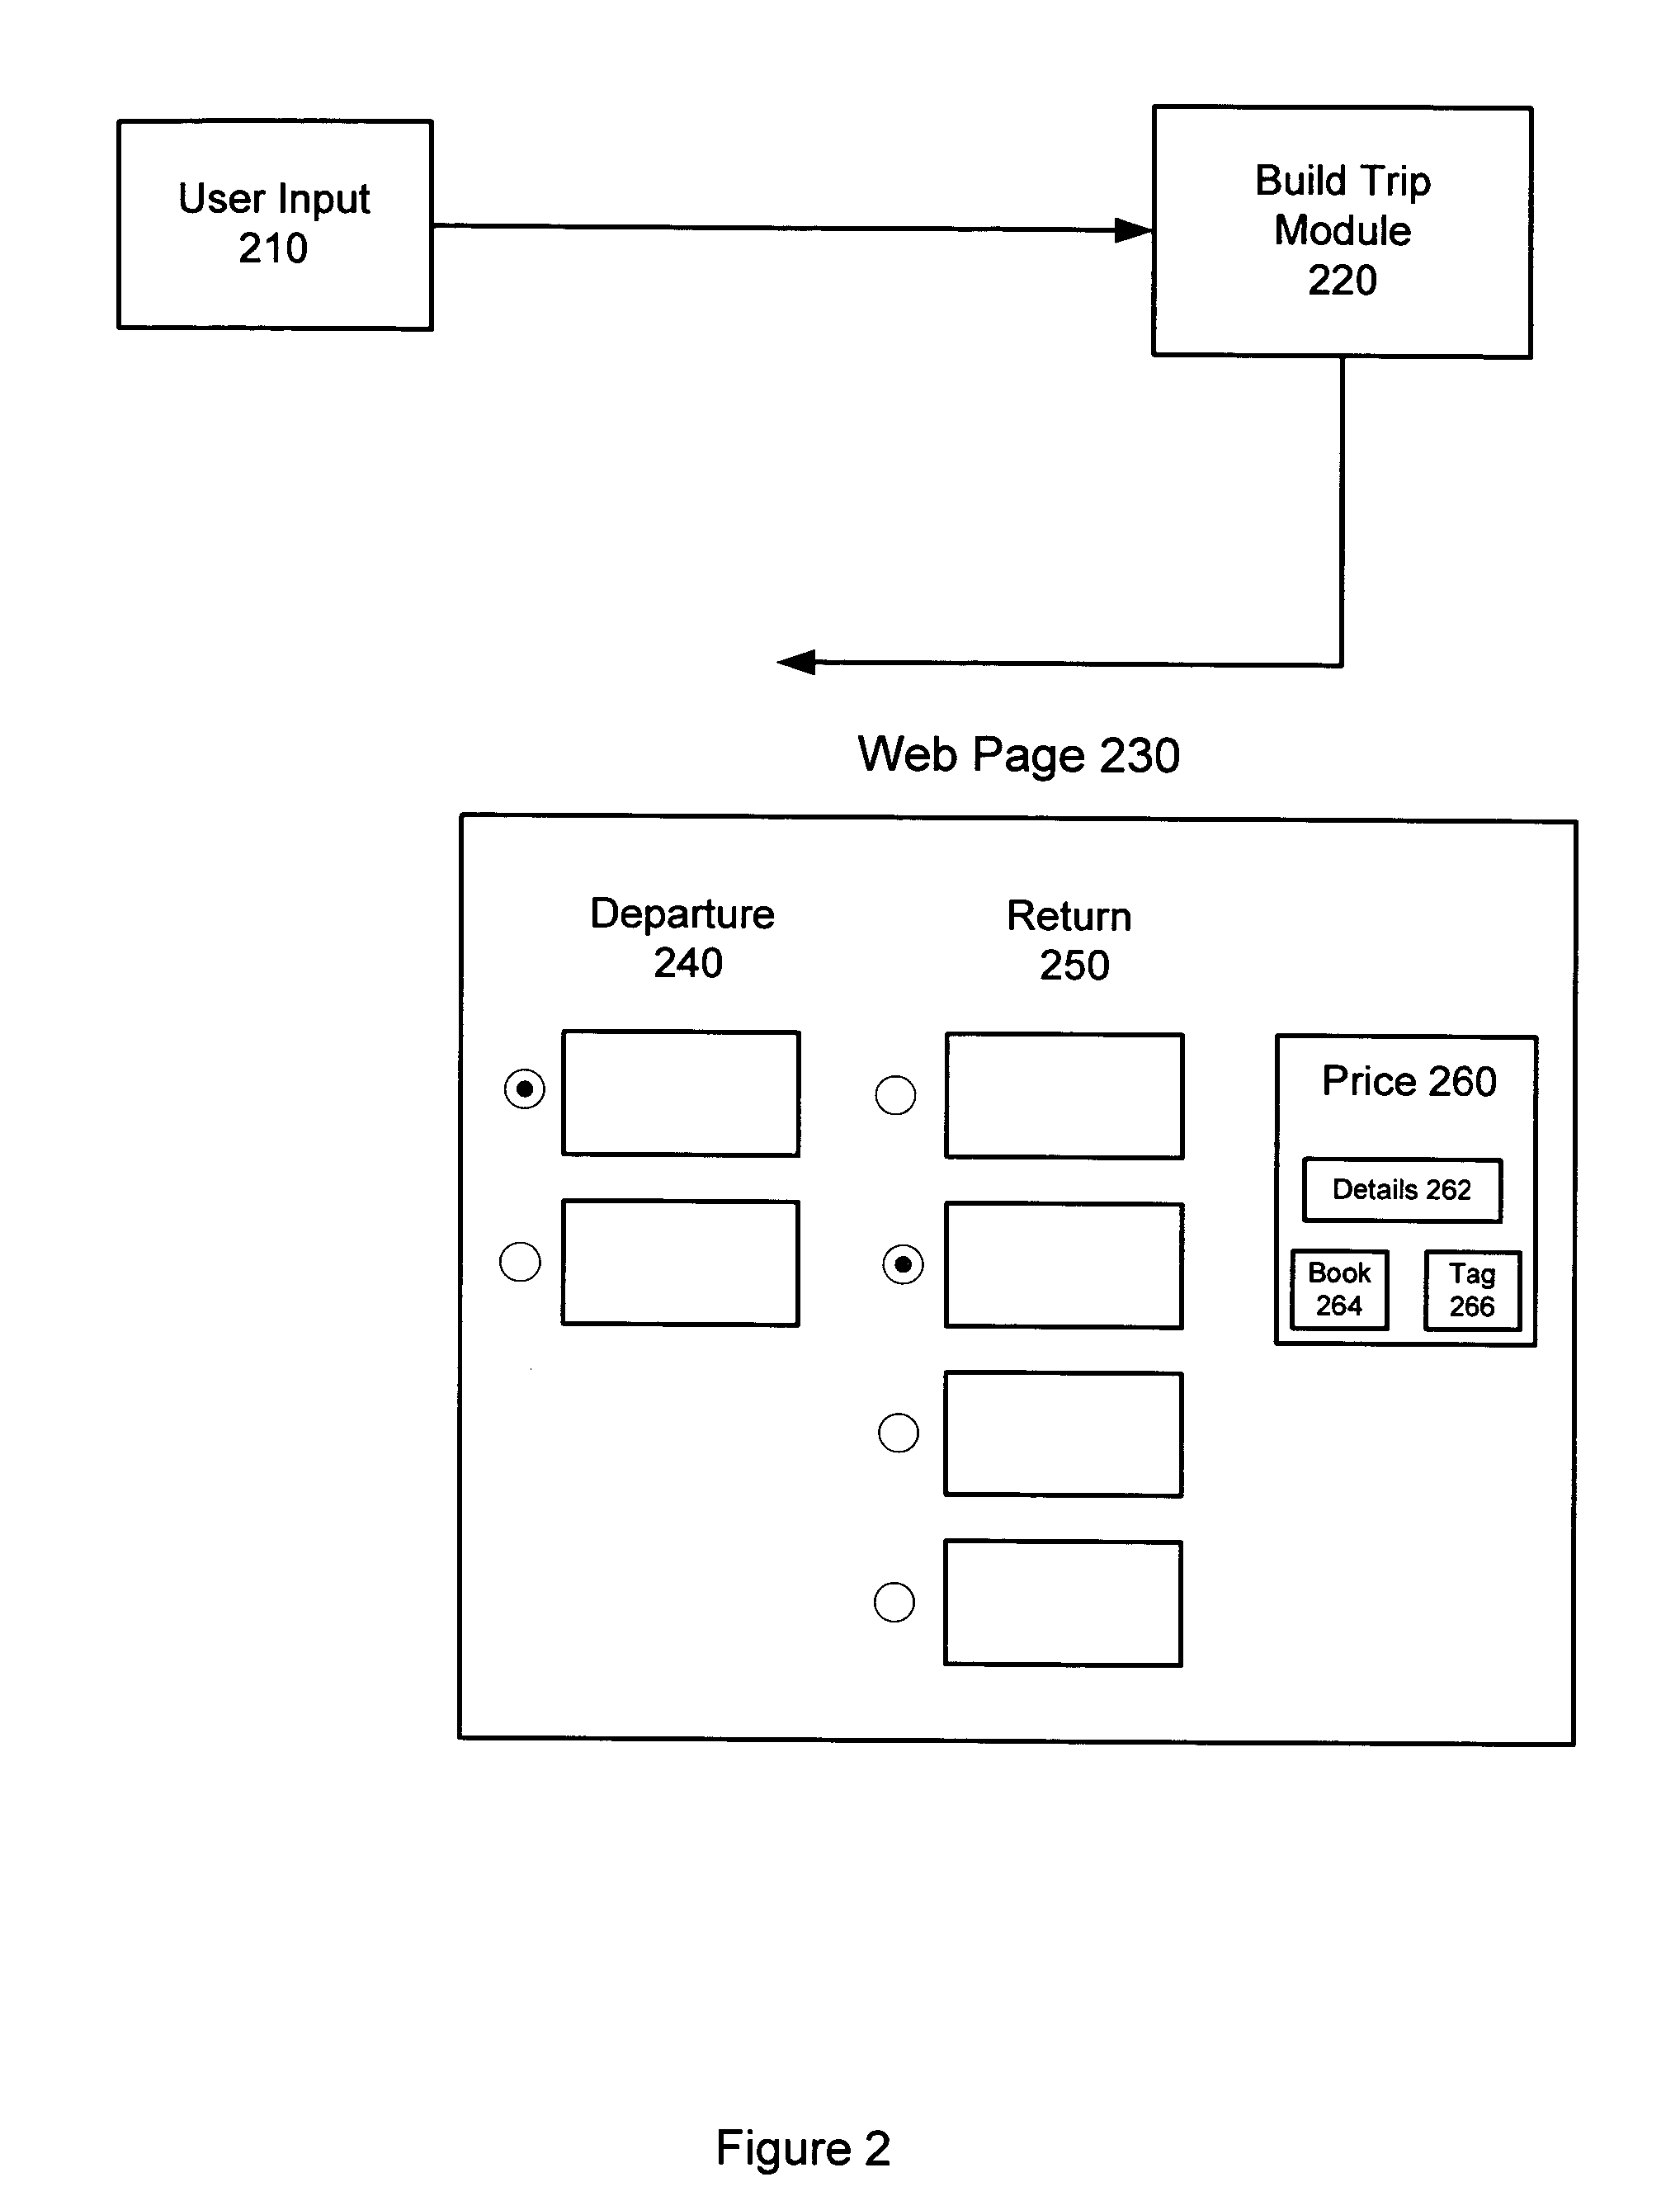 Method and system for scheduling travel ltineraries through an online interface